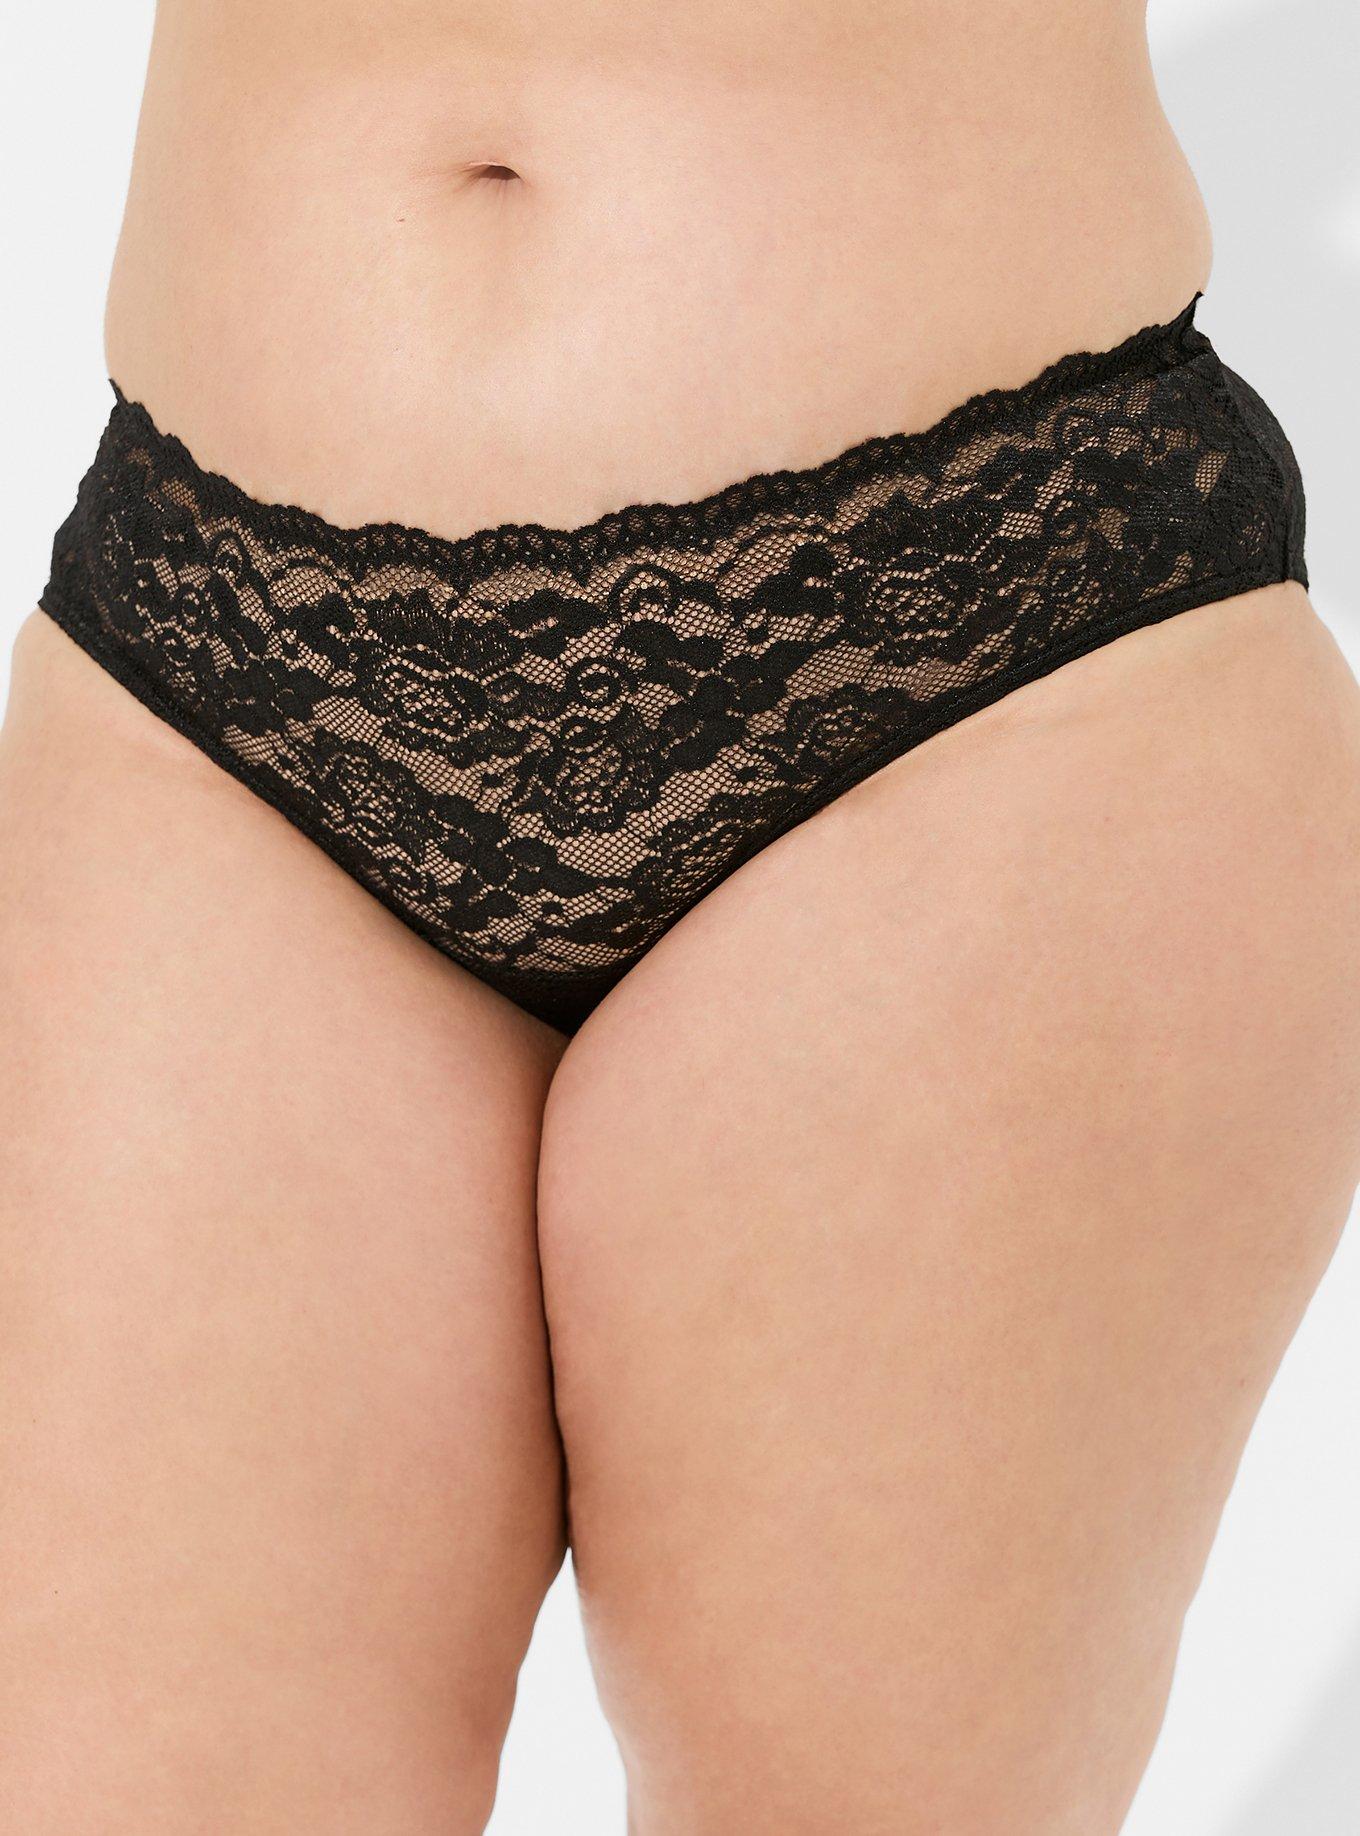 Urban Outfitters' Navajo Hipster Panty Is Just the Tip of the